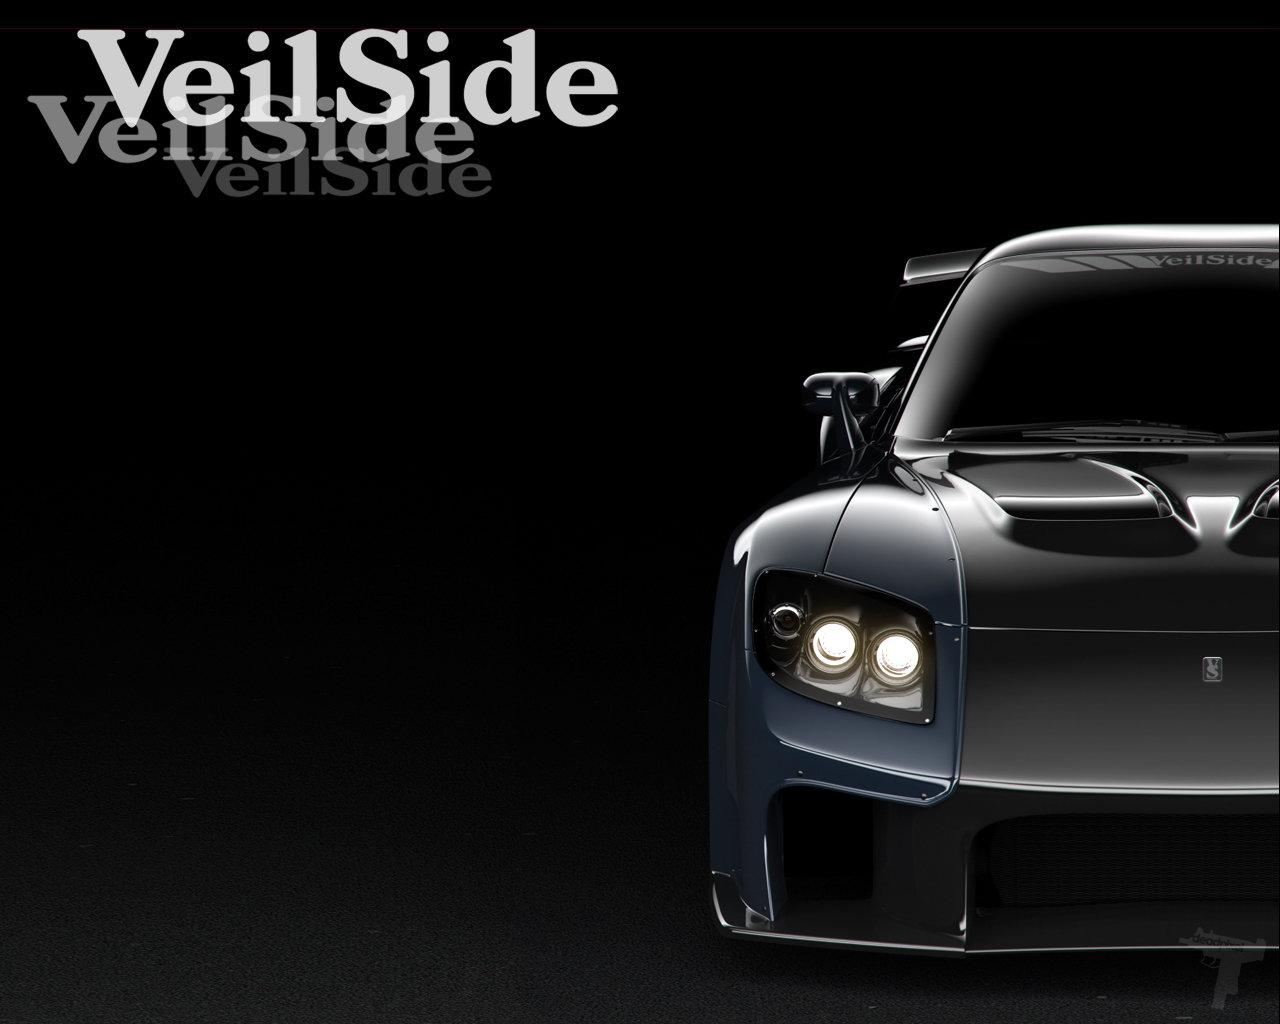 Free Download Veilside Fortune Rx7 By Dhedheahmed 1280x1024 For